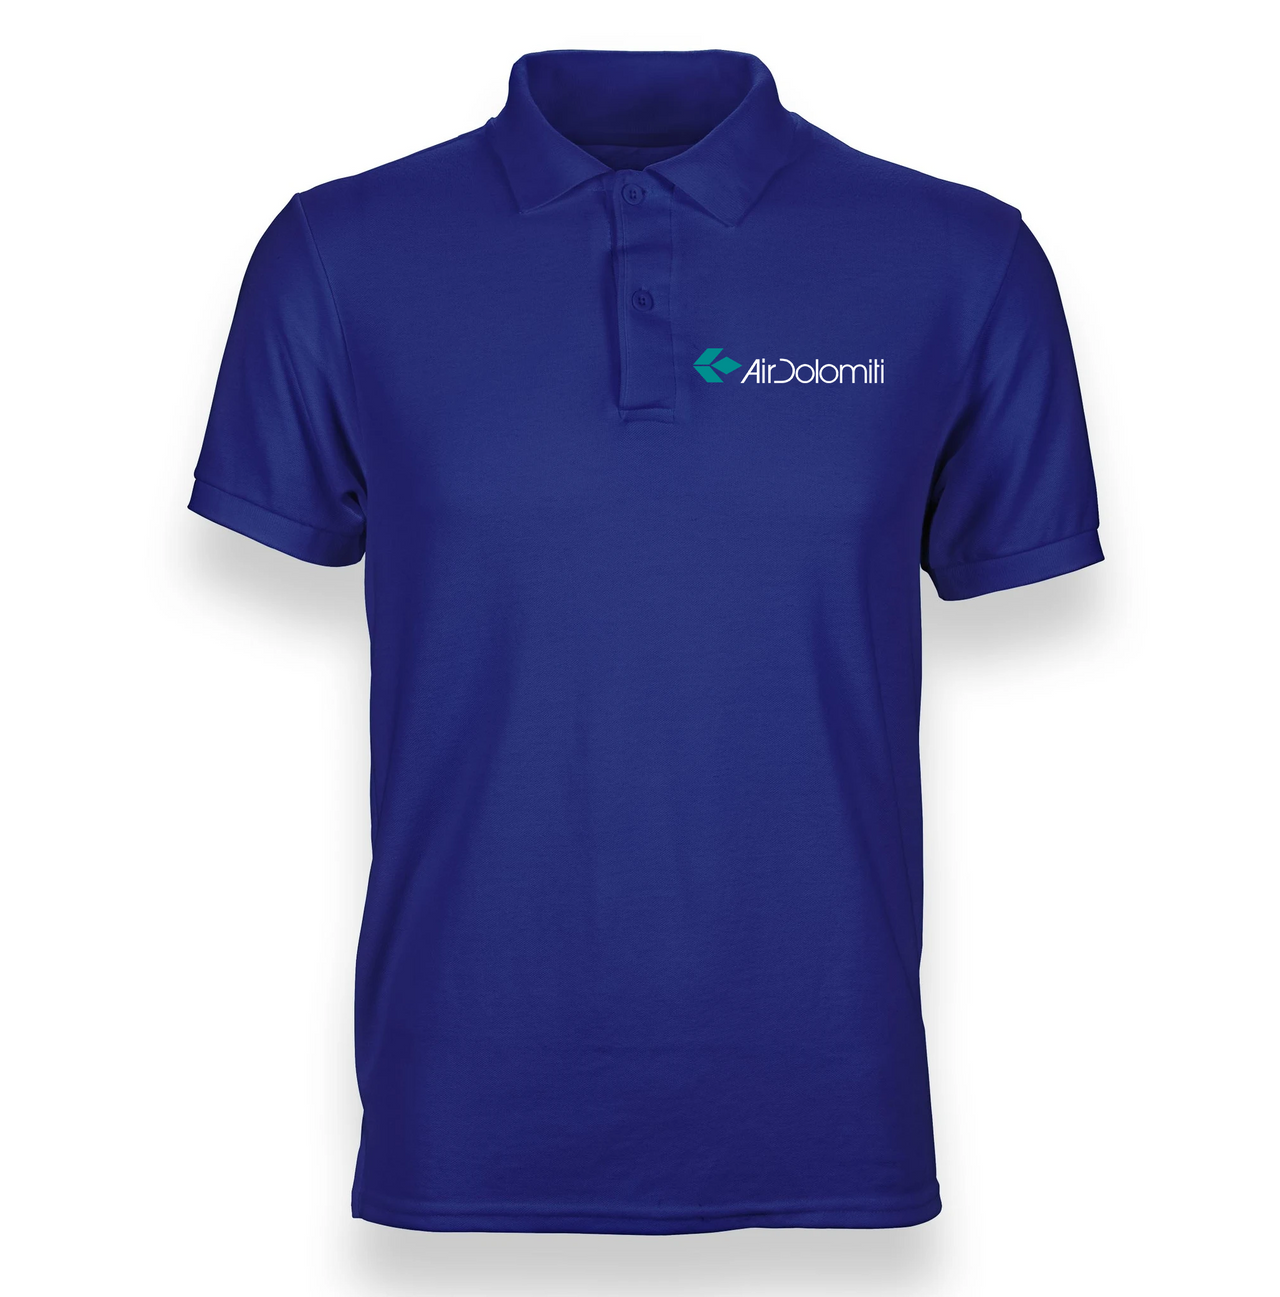 COLOMITI AIRLINES POLO T-SHIRT